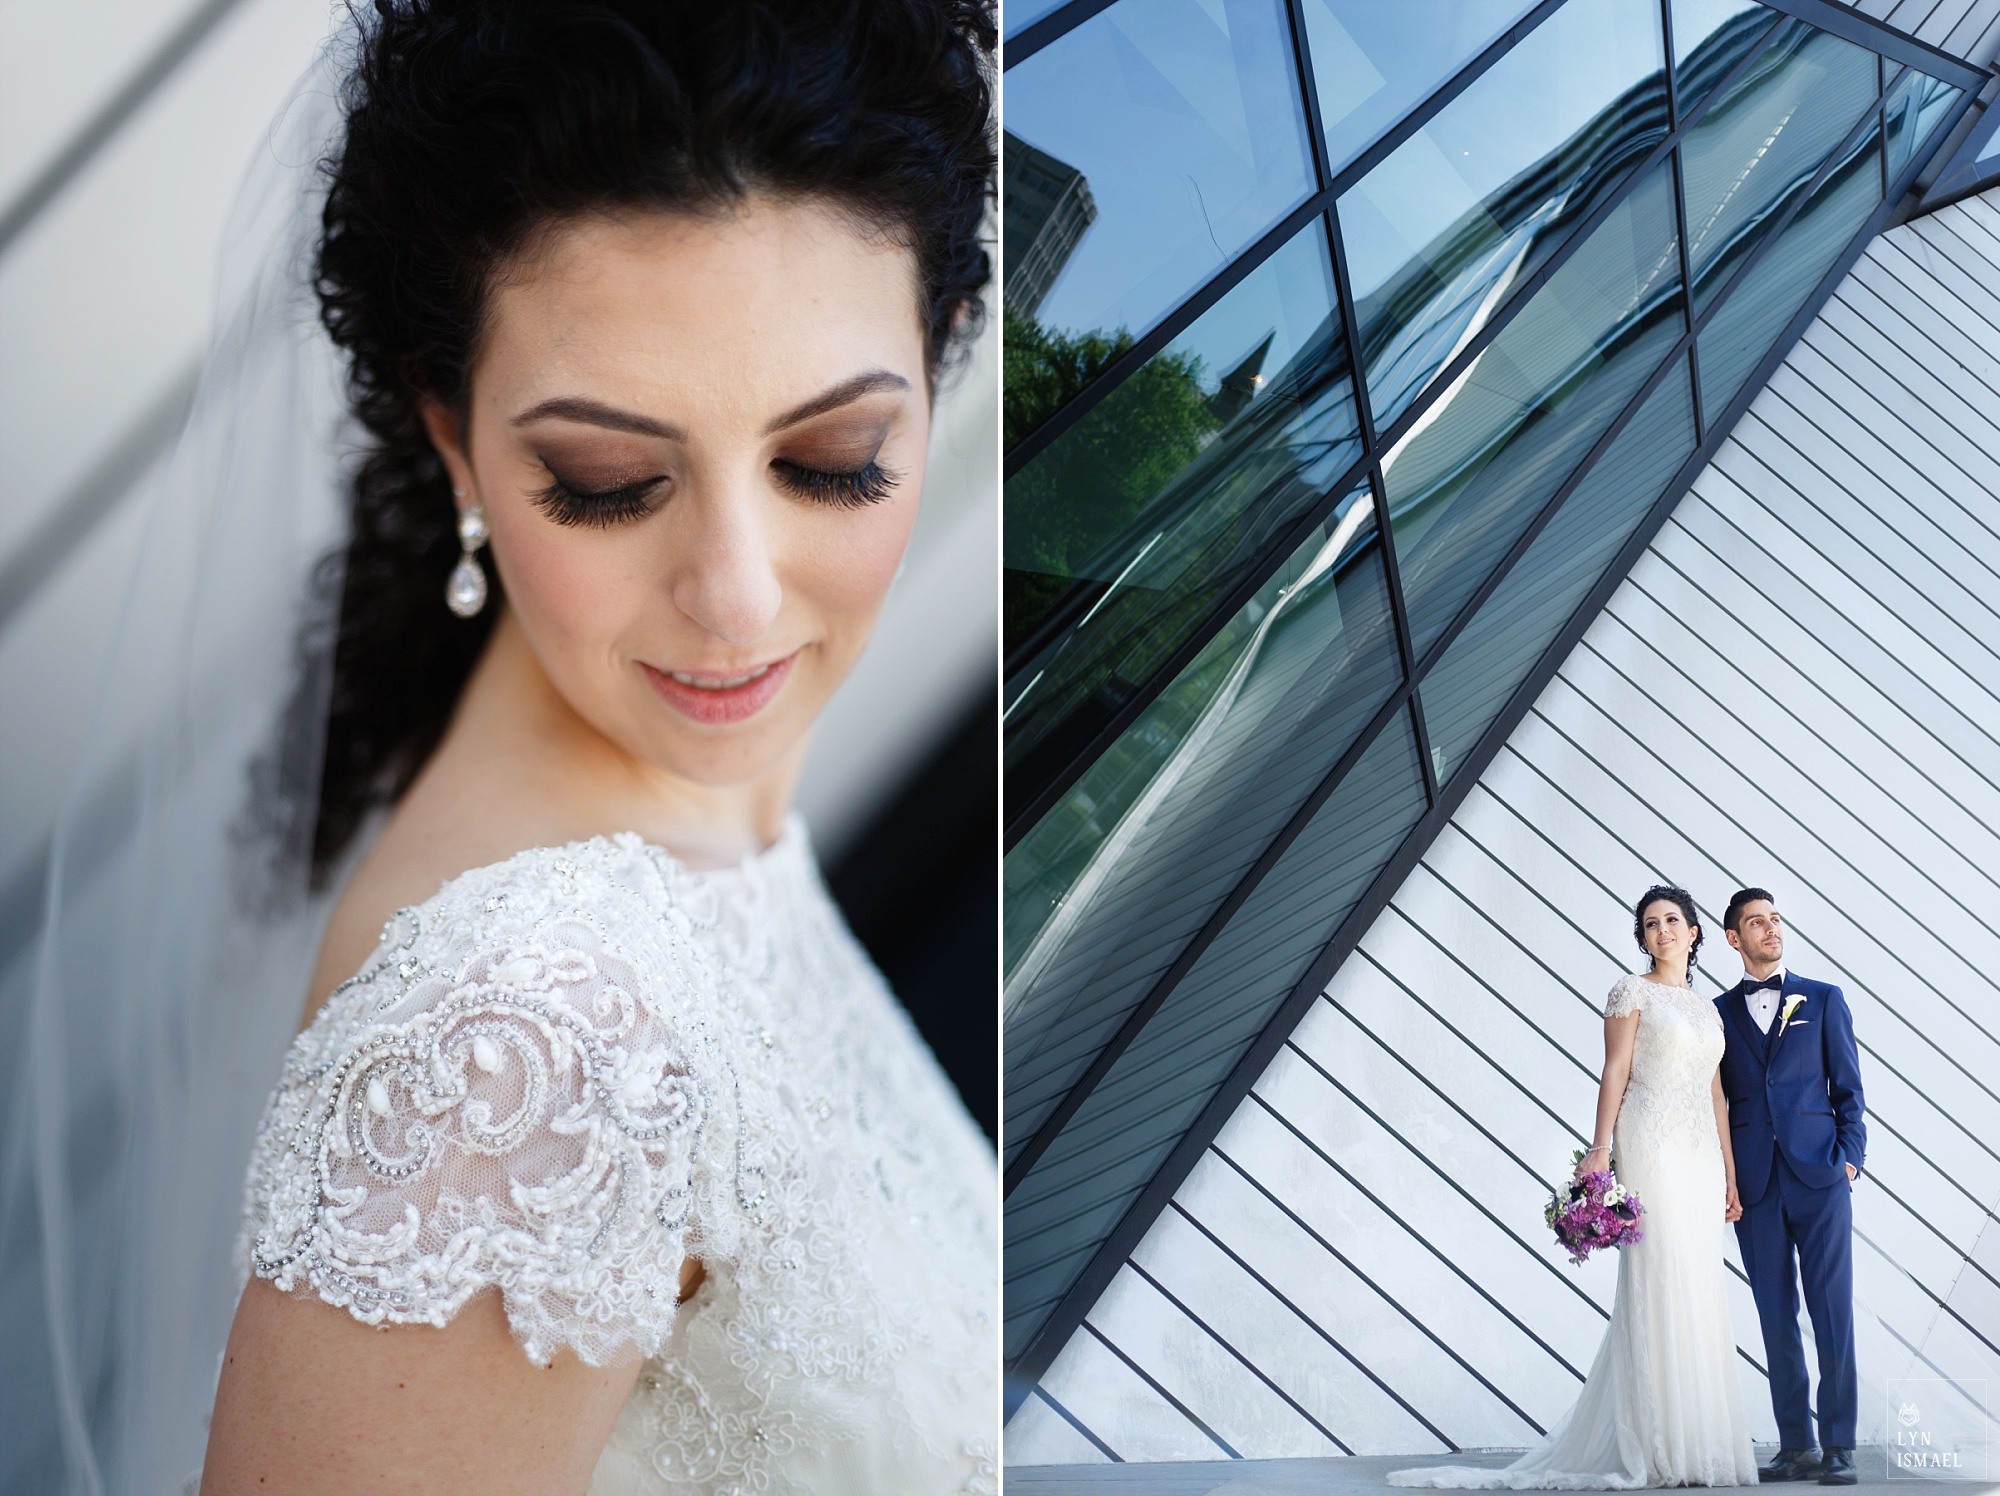 downtown Toronto portraits of the bride and groom